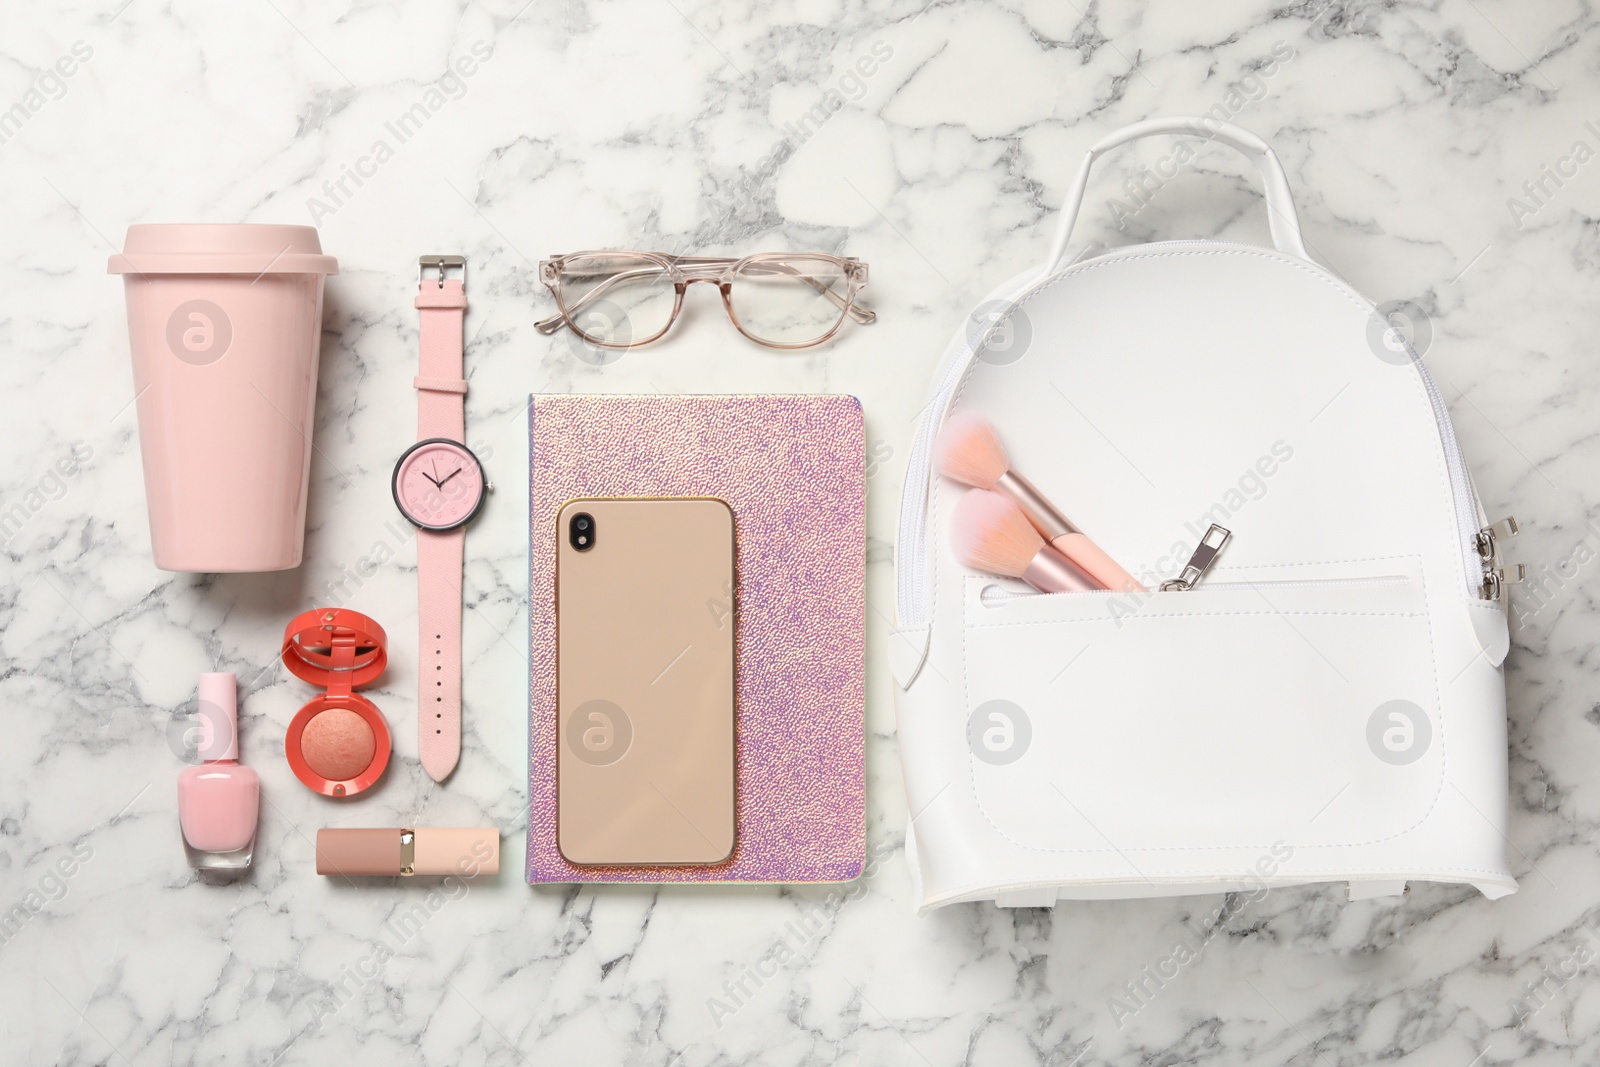 Photo of Stylish urban backpack and different items on white marble table, flat lay